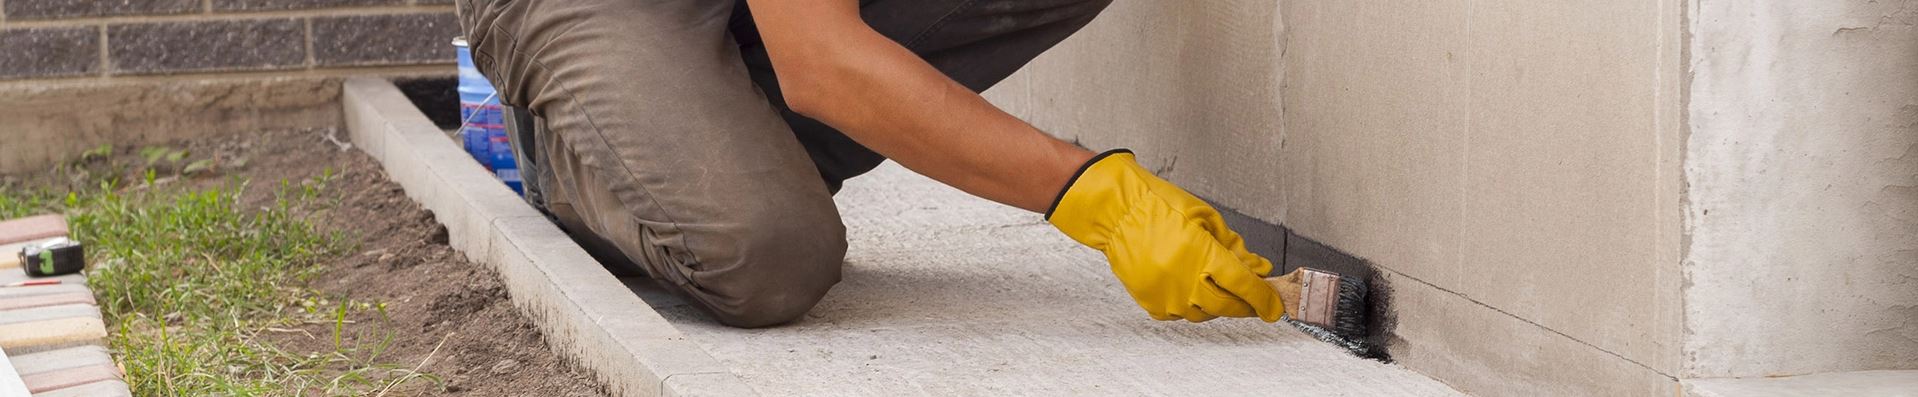 Concrete touch up by a worker